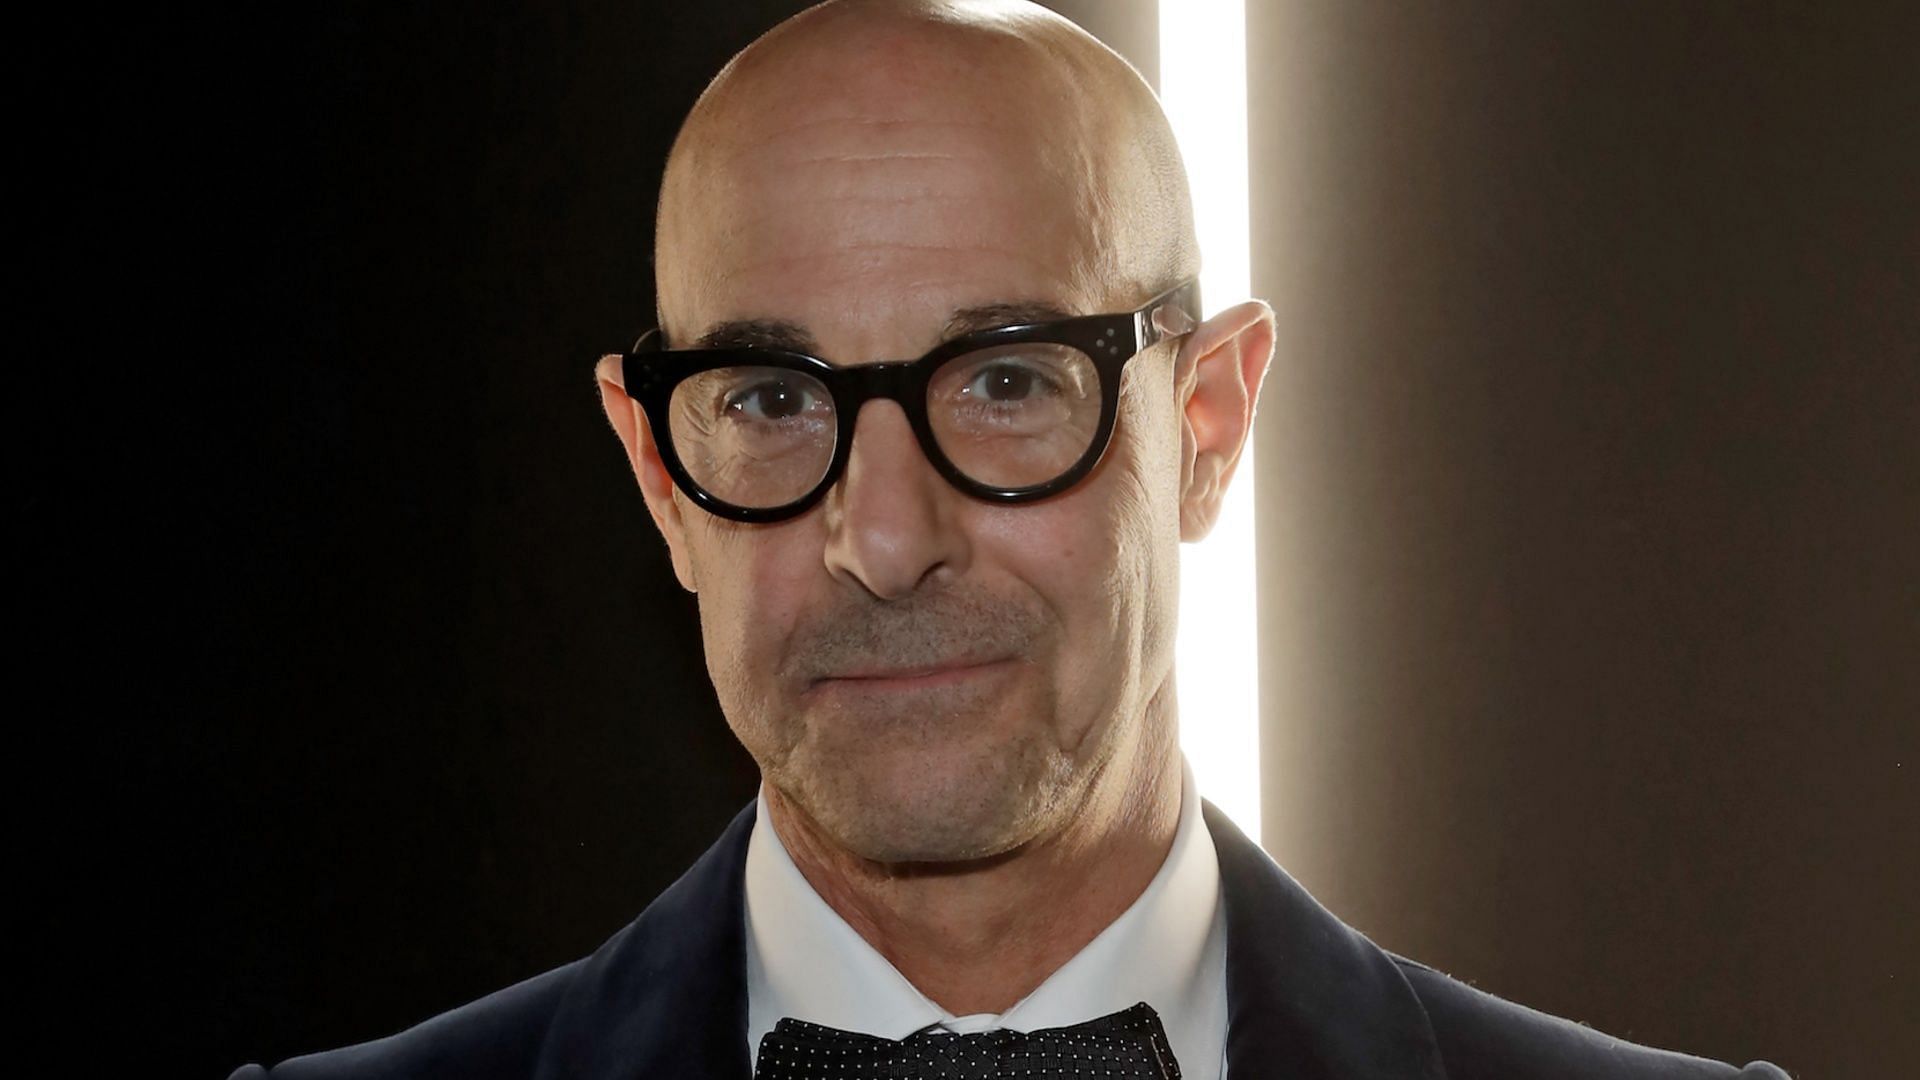 Stanley Tucci. (Photo via Dave Benett/Getty Images)